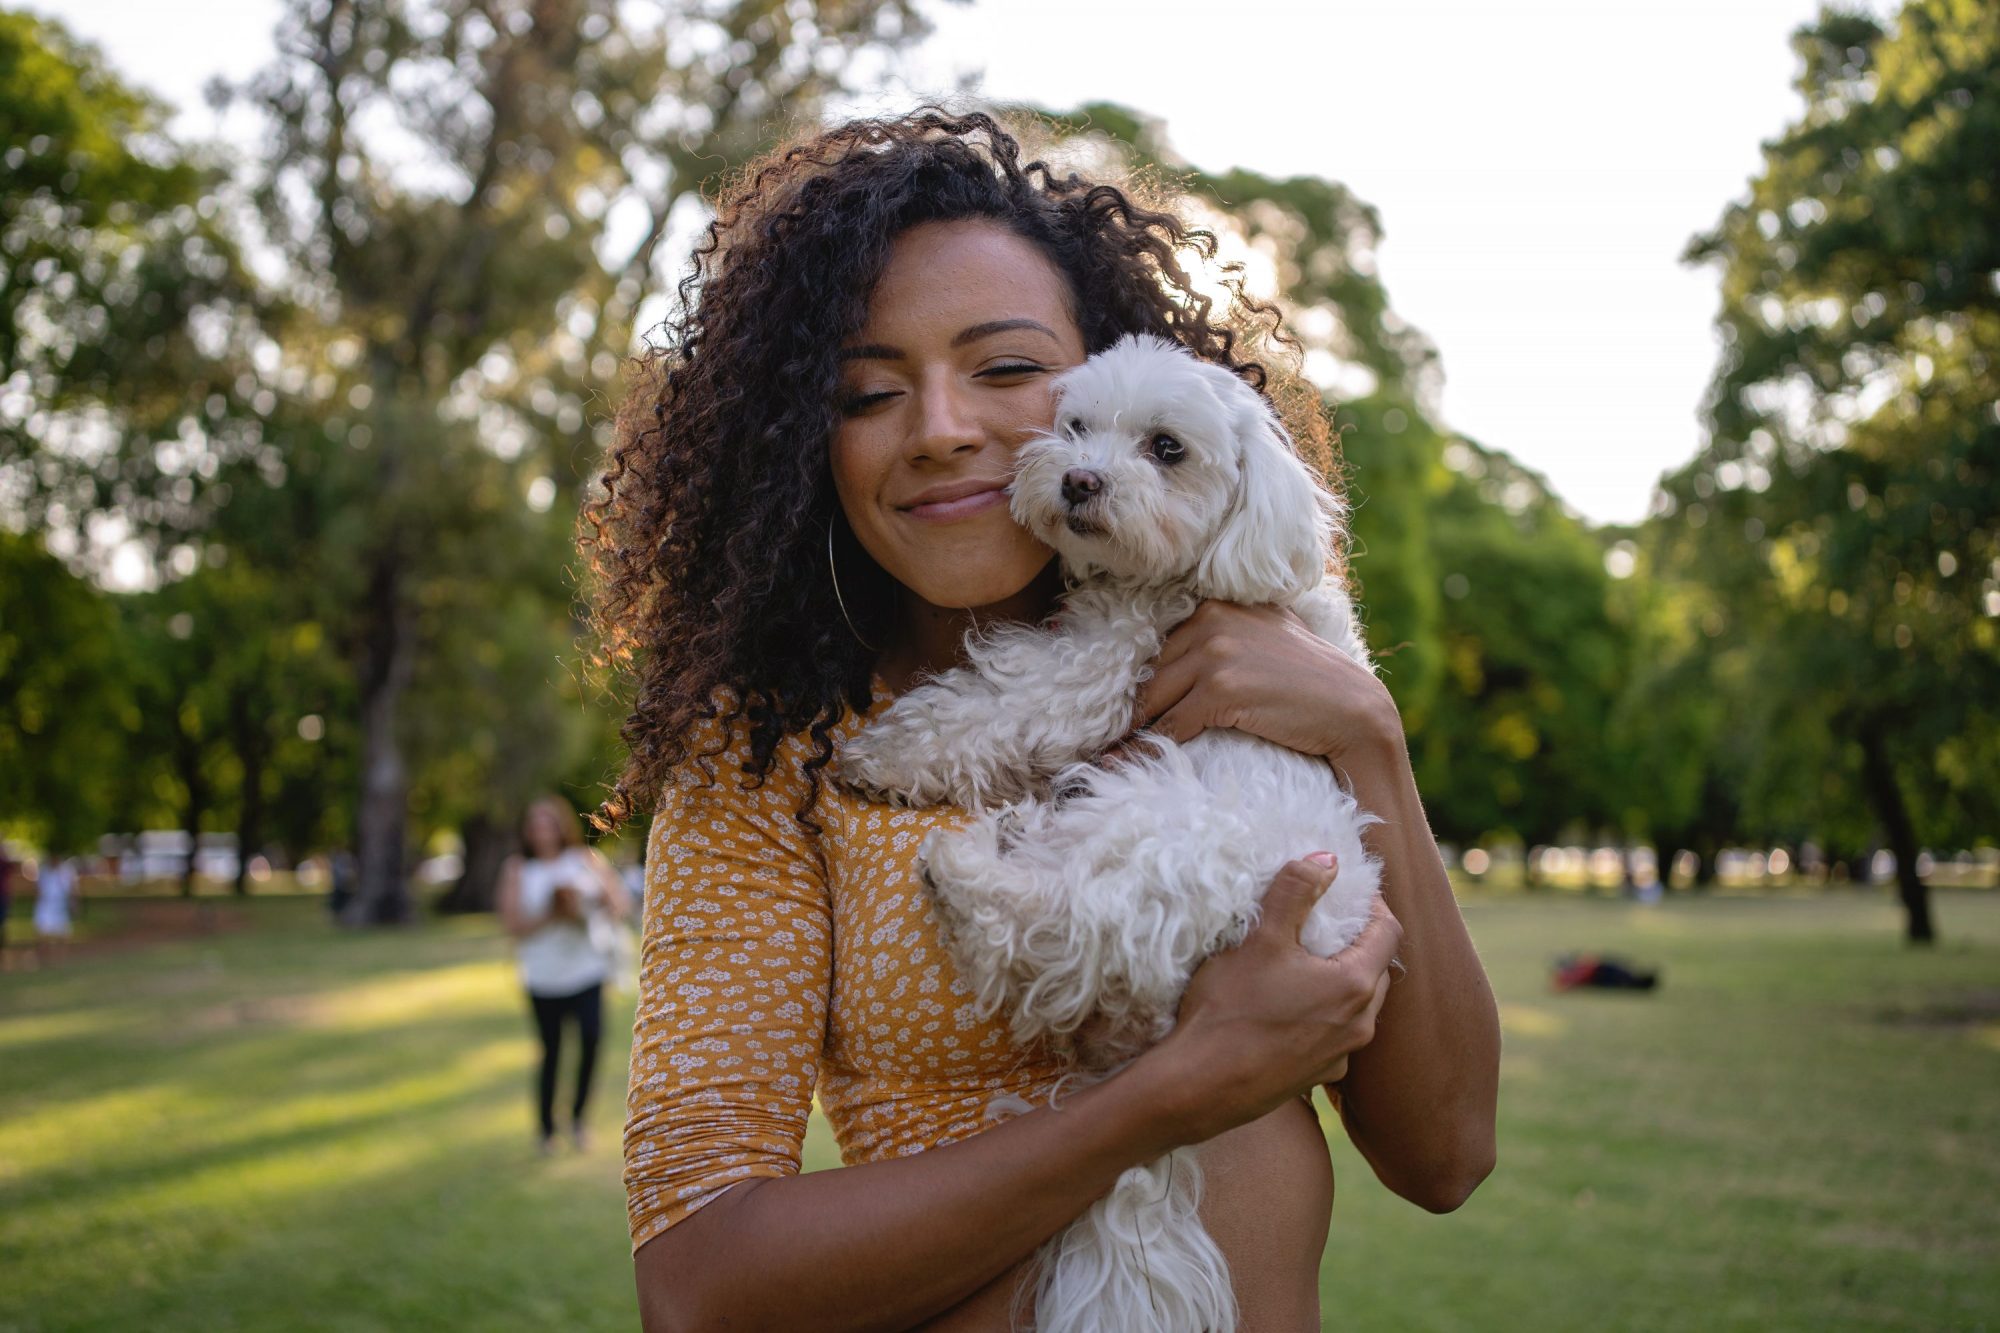 A woman holds her small, white dog in a park.